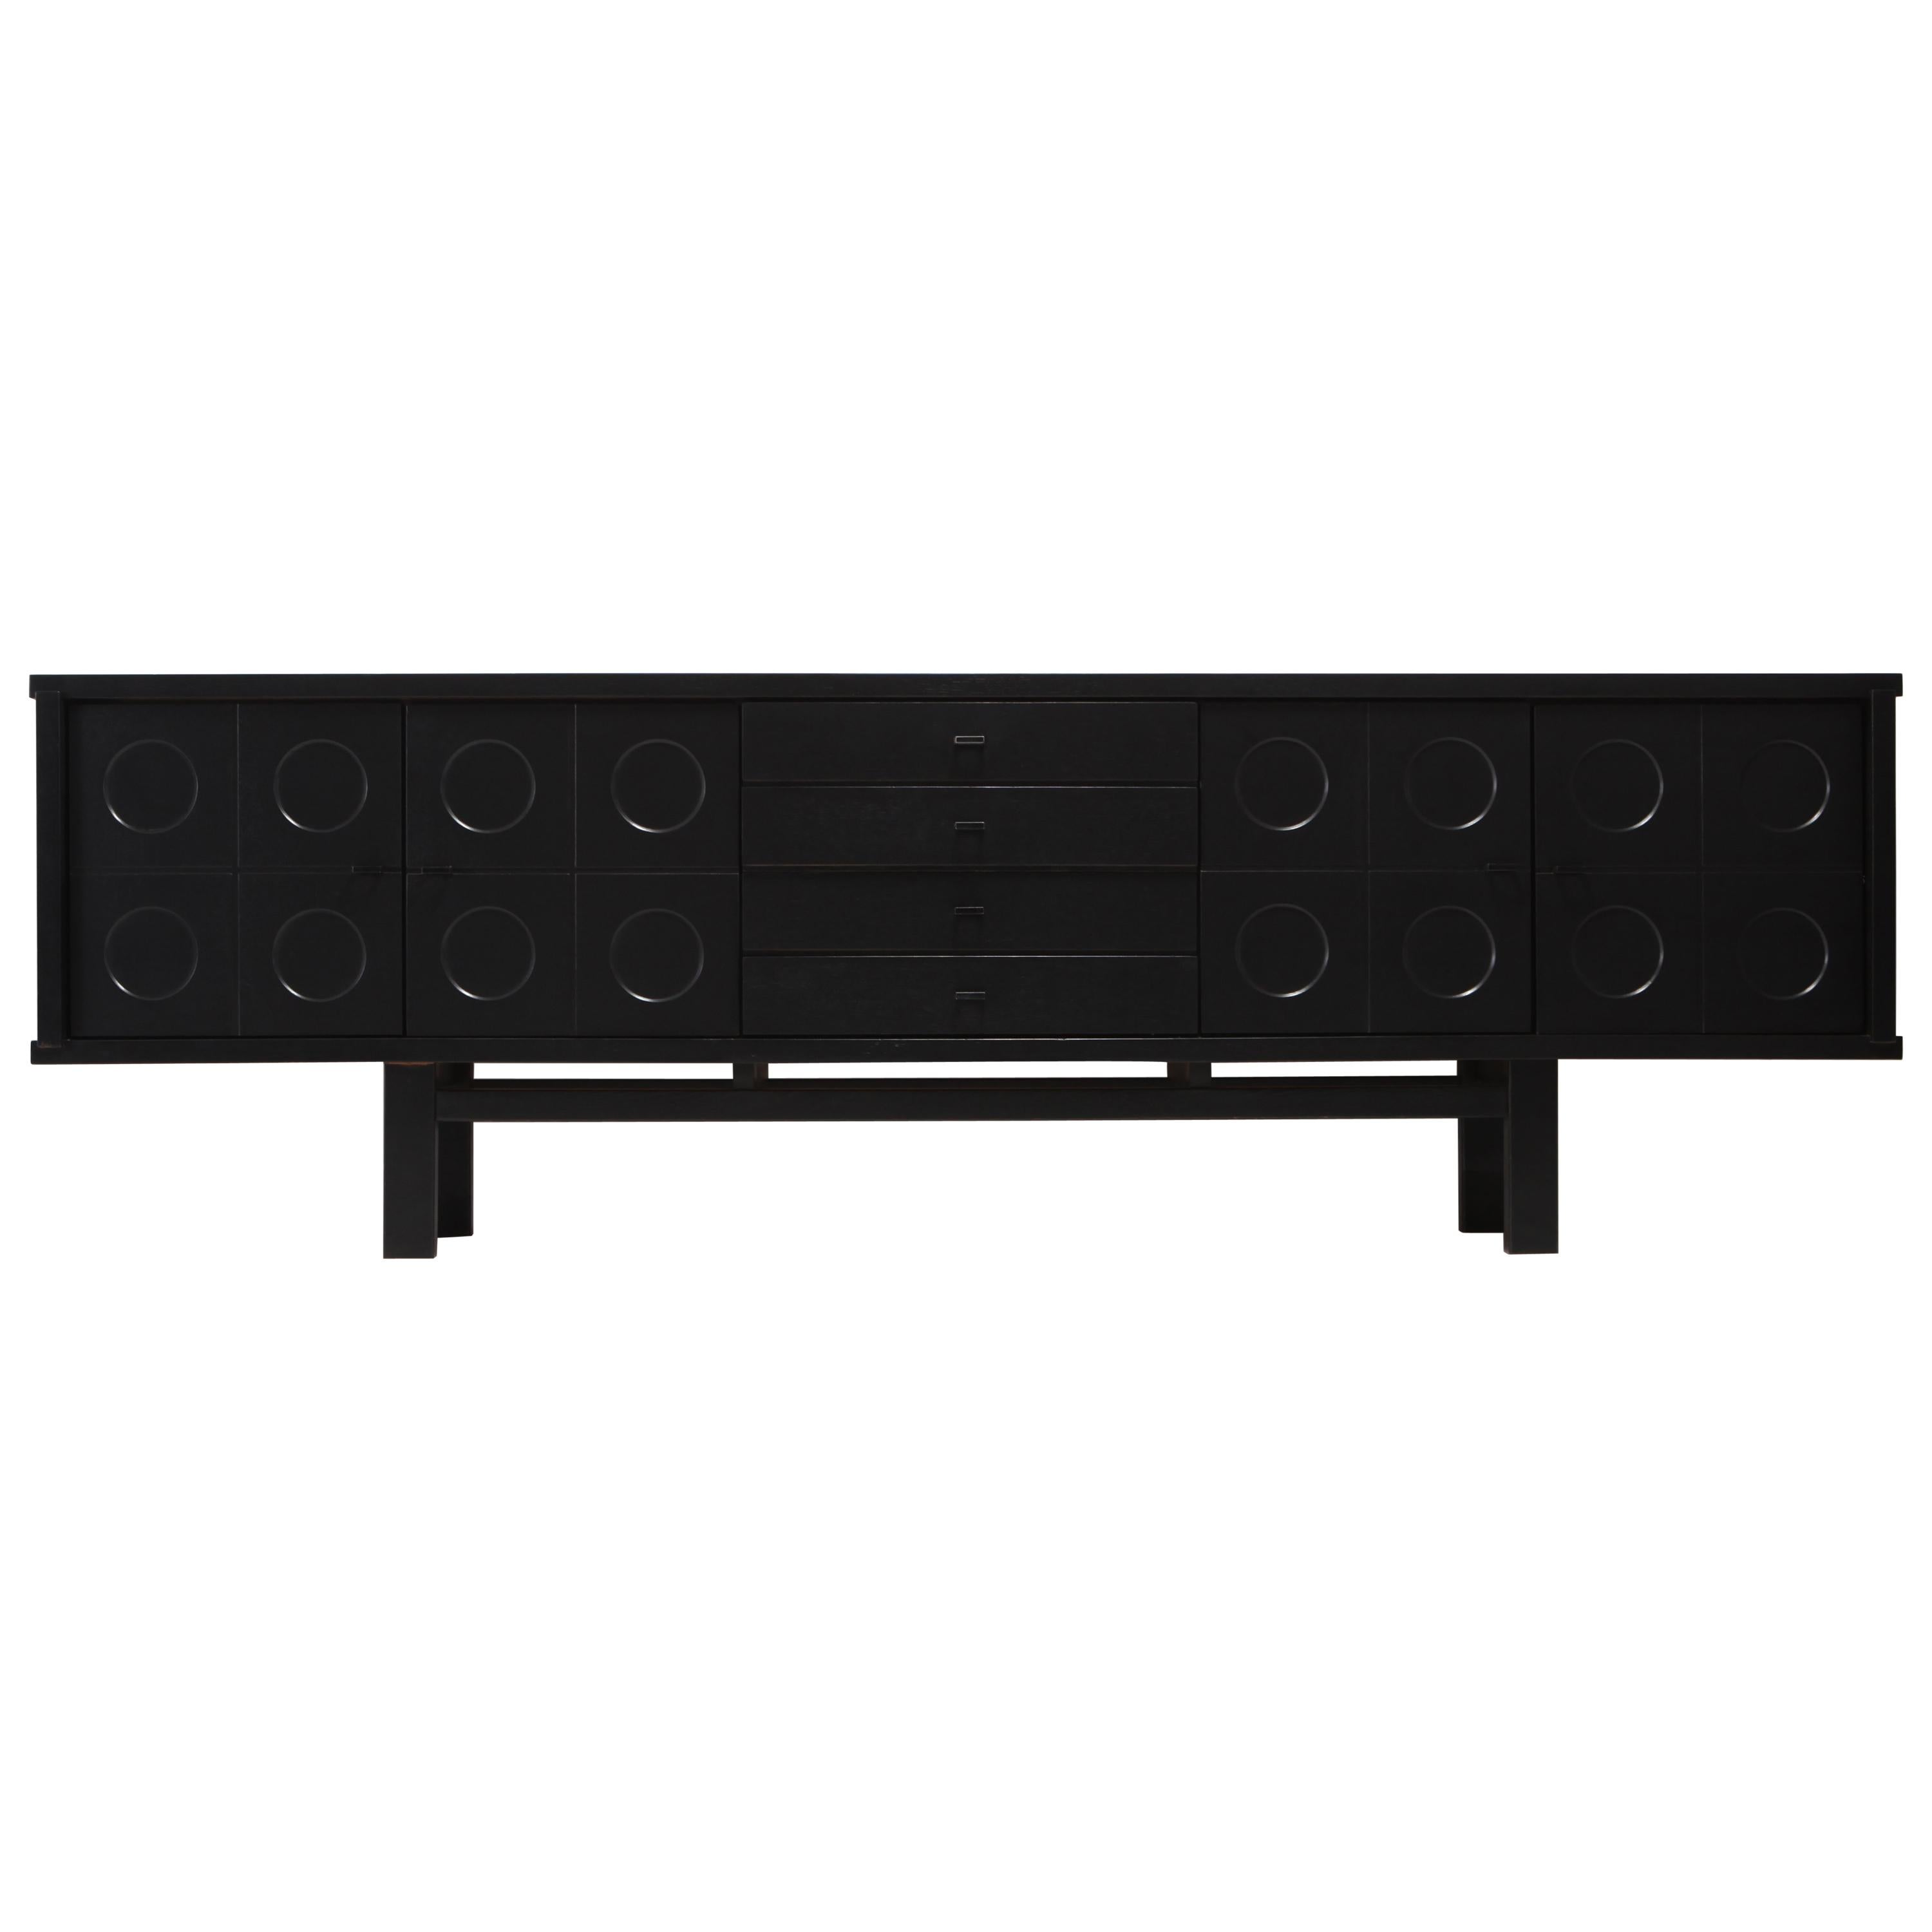 Brutalist sideboard made out of ebonized oak.
The symmetry of this design combined with the graphical pattern on the doors is adding a Brutalist expression to this storage piece. It contains plenty of storage possibilities with shelves on the